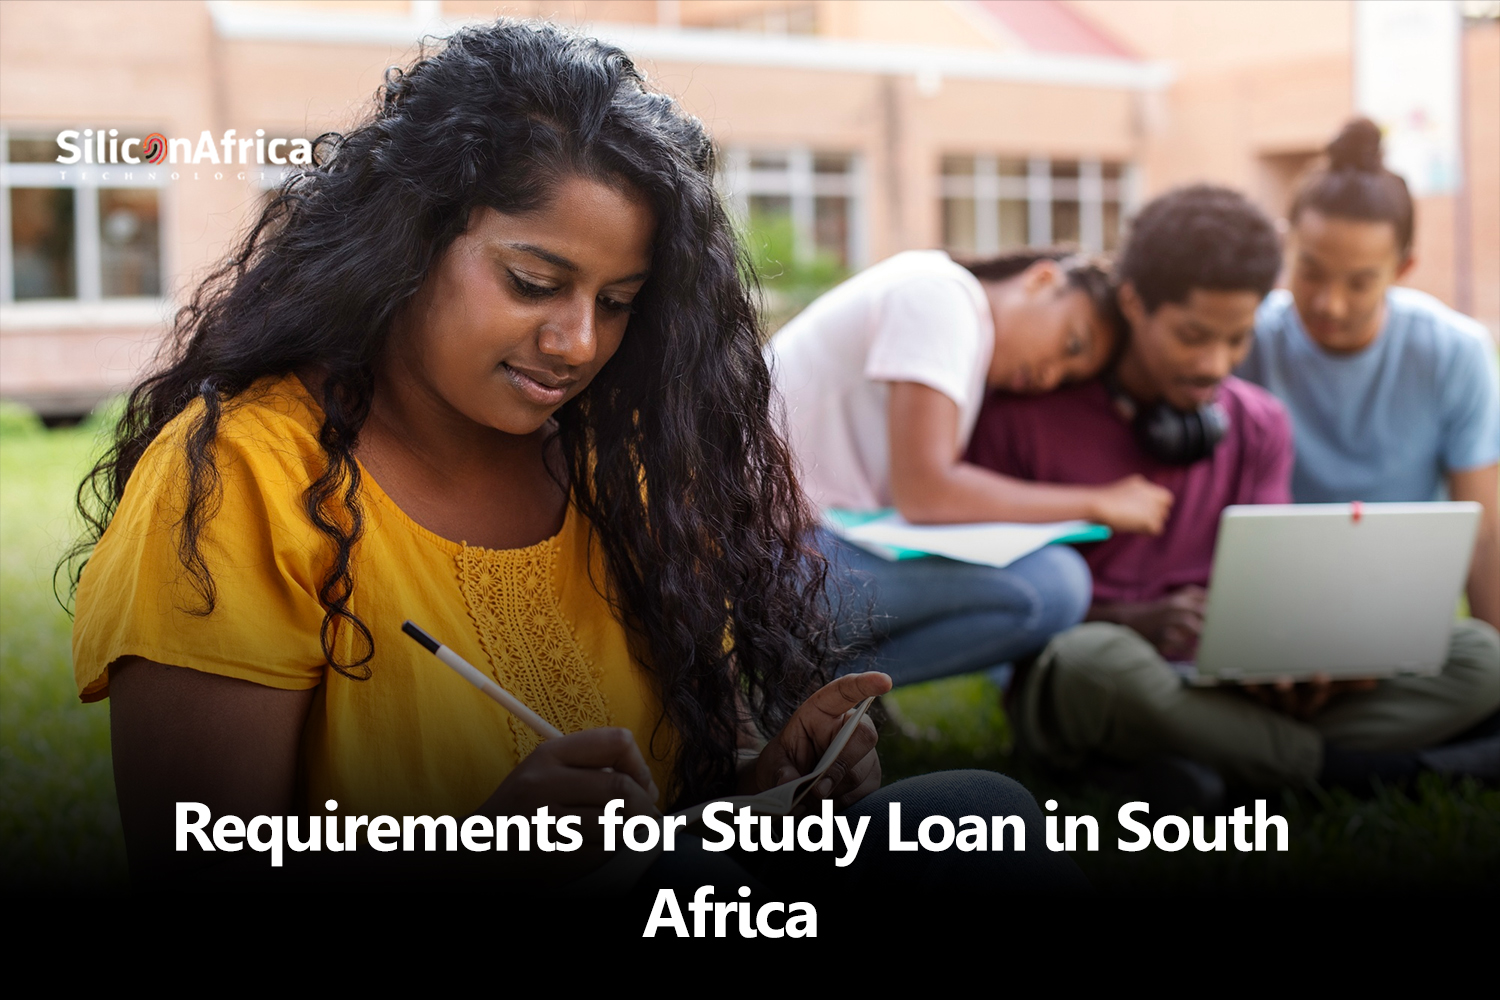 Requirements for Study Loan in South Africa